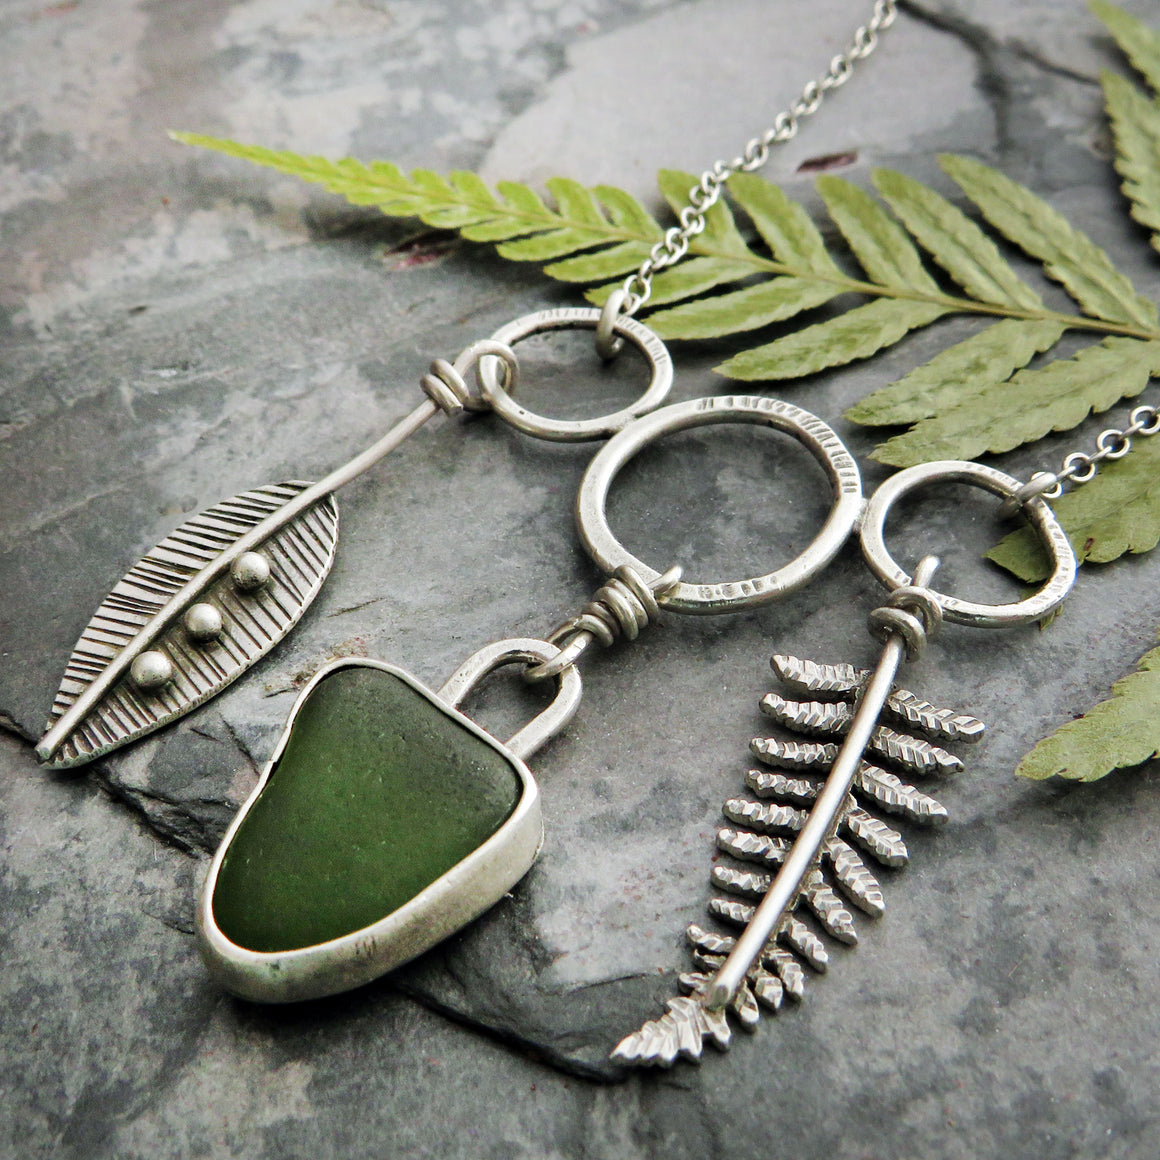 Botanical Charm Necklace with Moss Green Sea Glass I